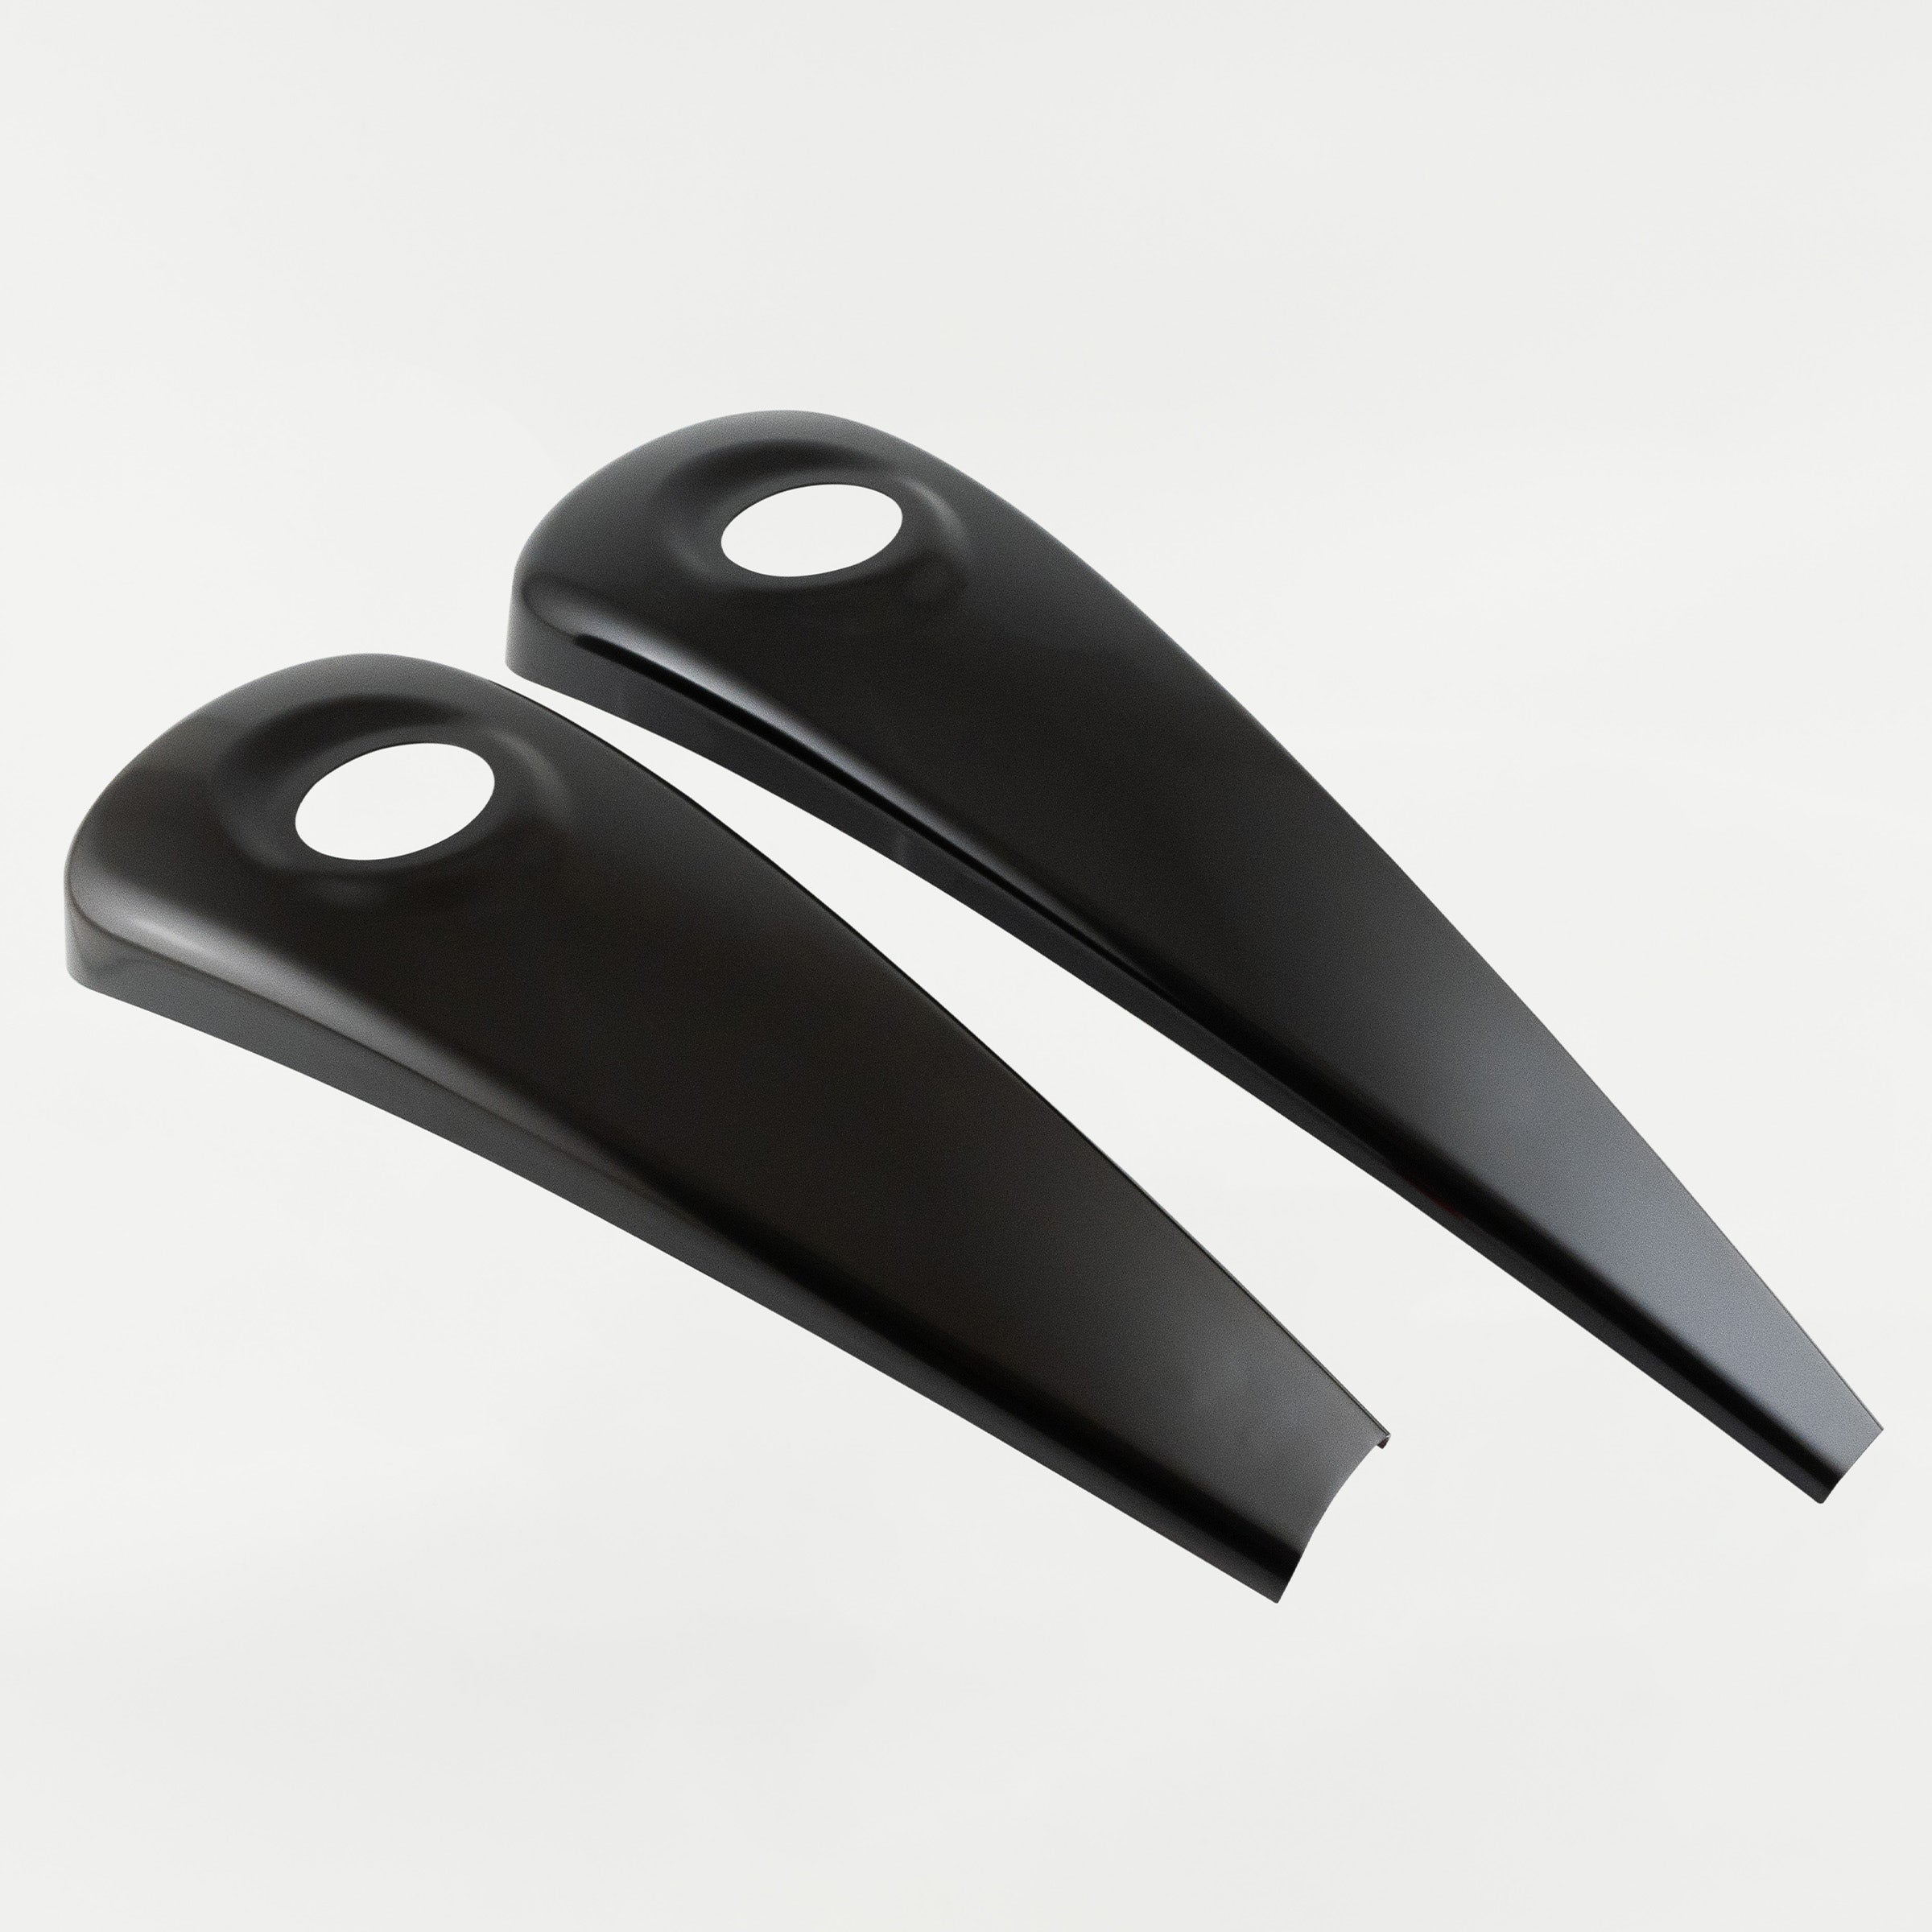 Stock length verses Extended Curvaceous Metal Dash for 2008 - 2023 FLH, FLTR Motorcycles(Stock Length (left) vs. Extended (right) Curvaceous Dash)